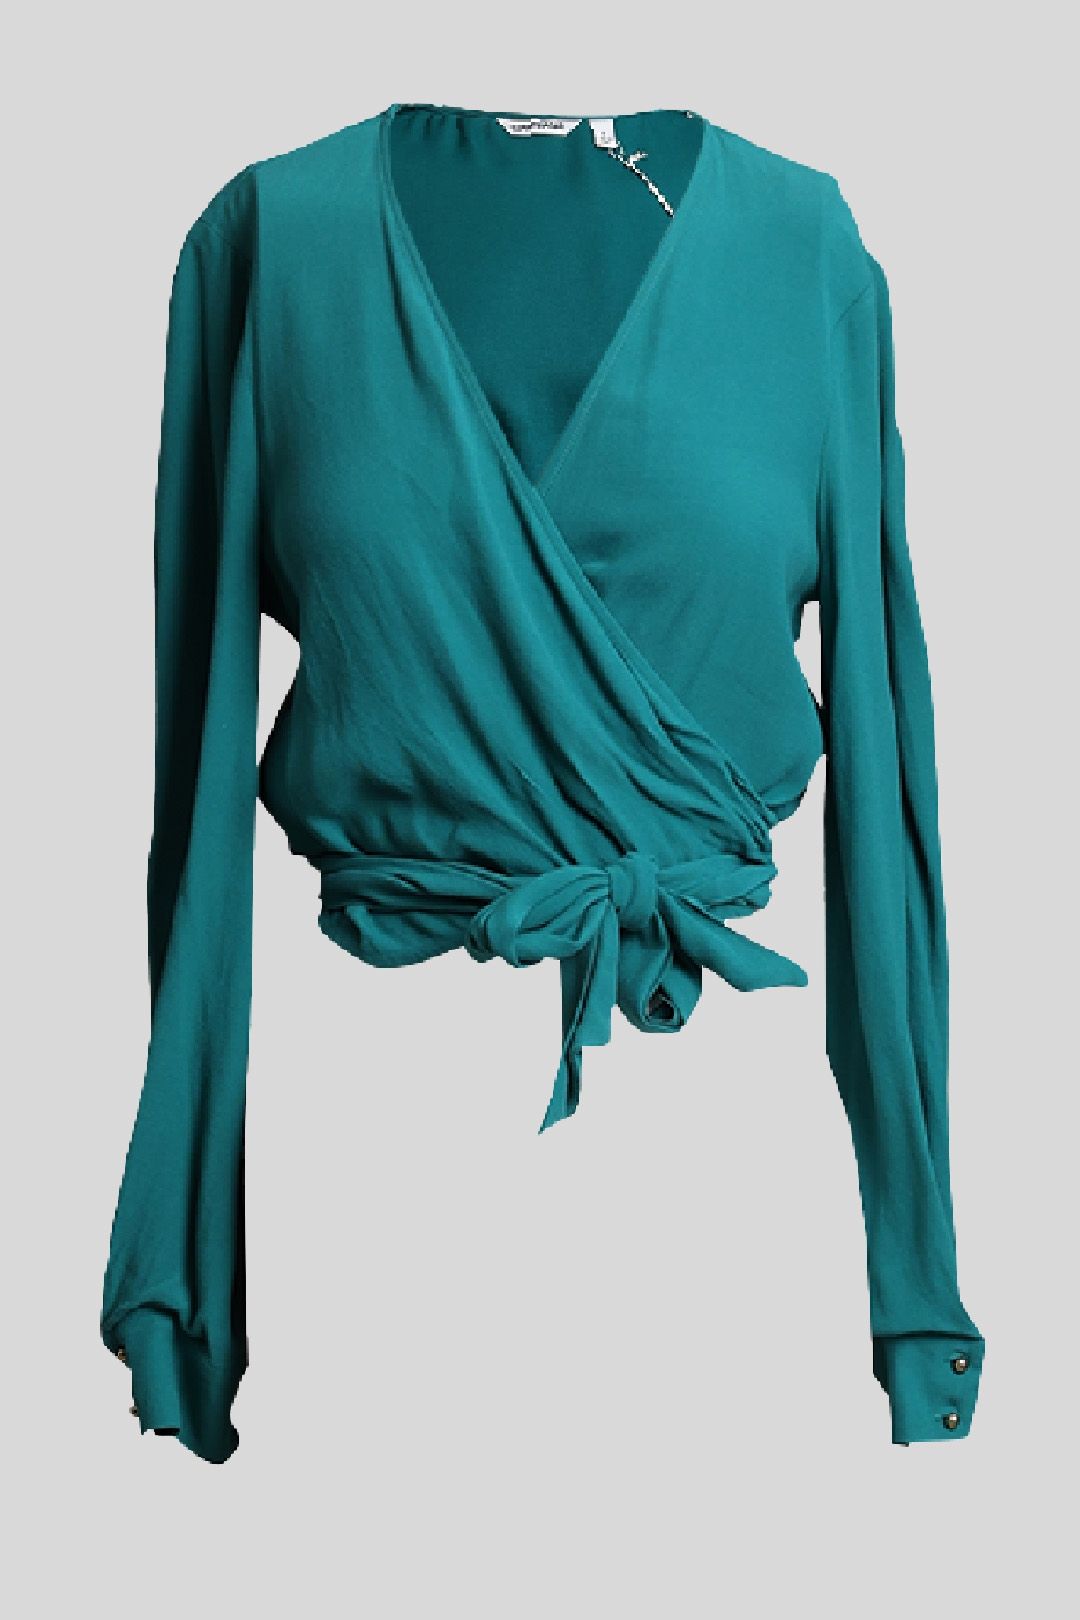 Country Road - Green Wrap Top